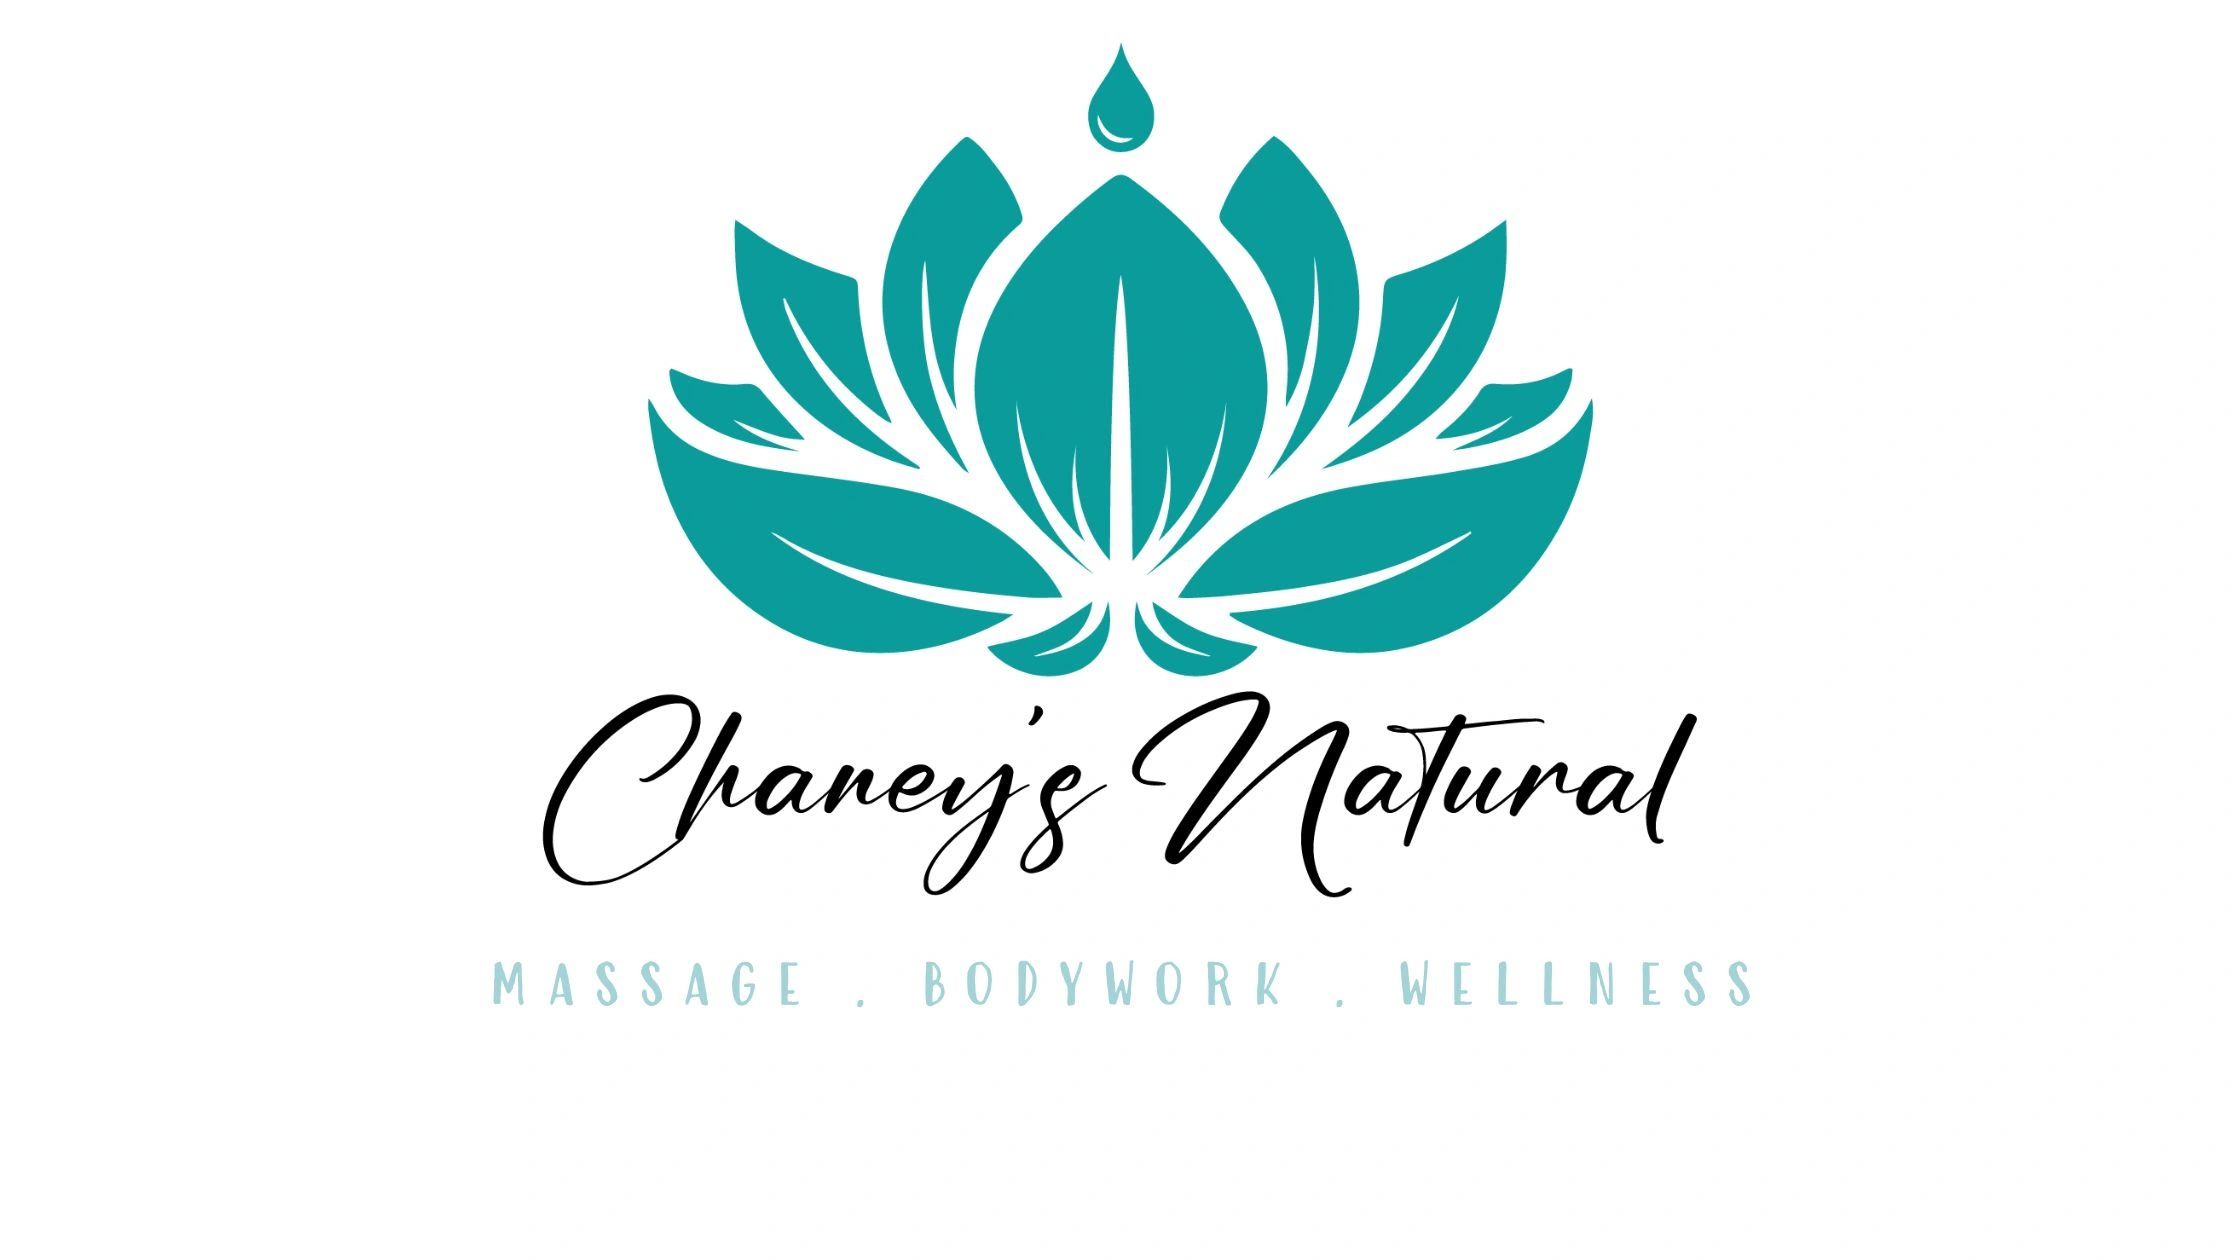 Massage Therapy and Bodywork Services